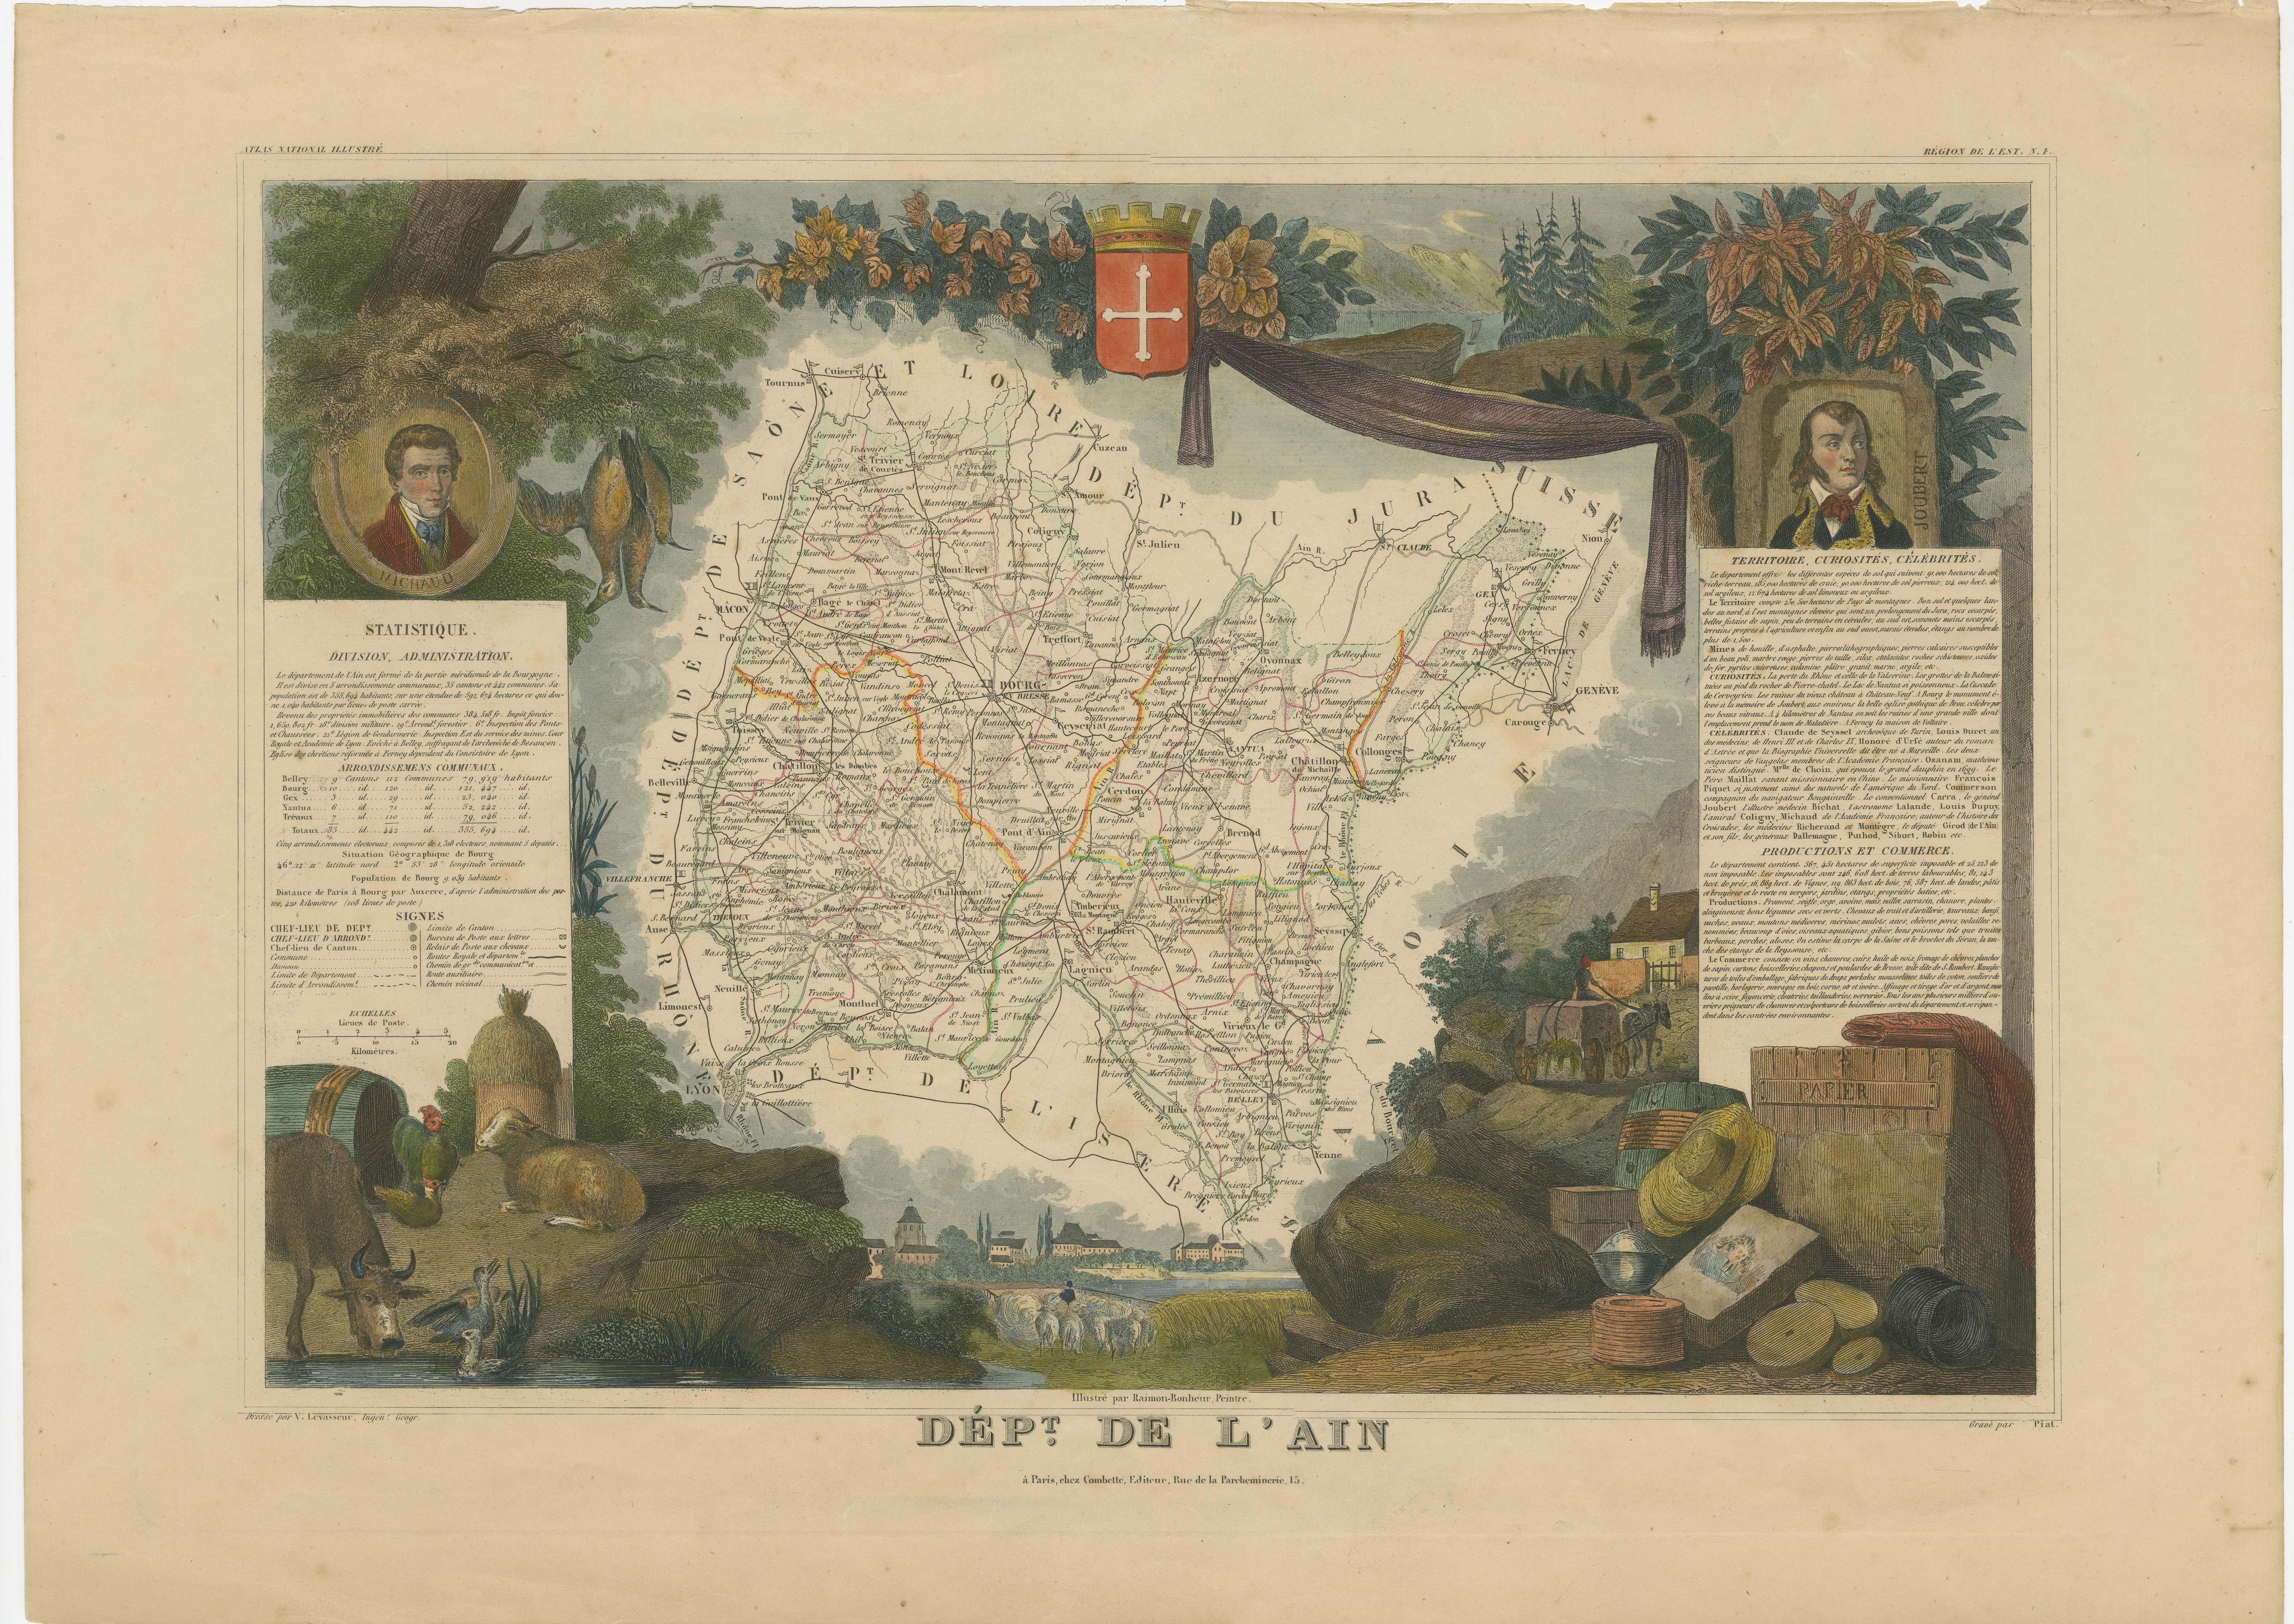 Antique map titled 'Dépt. de l'Ain'. Map of the French department of l'Ain, France. This area of France is known for its Bugey wines, which are generally aromatic and white. It is also known for its fine blue cheese, poultry, and fisheries. The